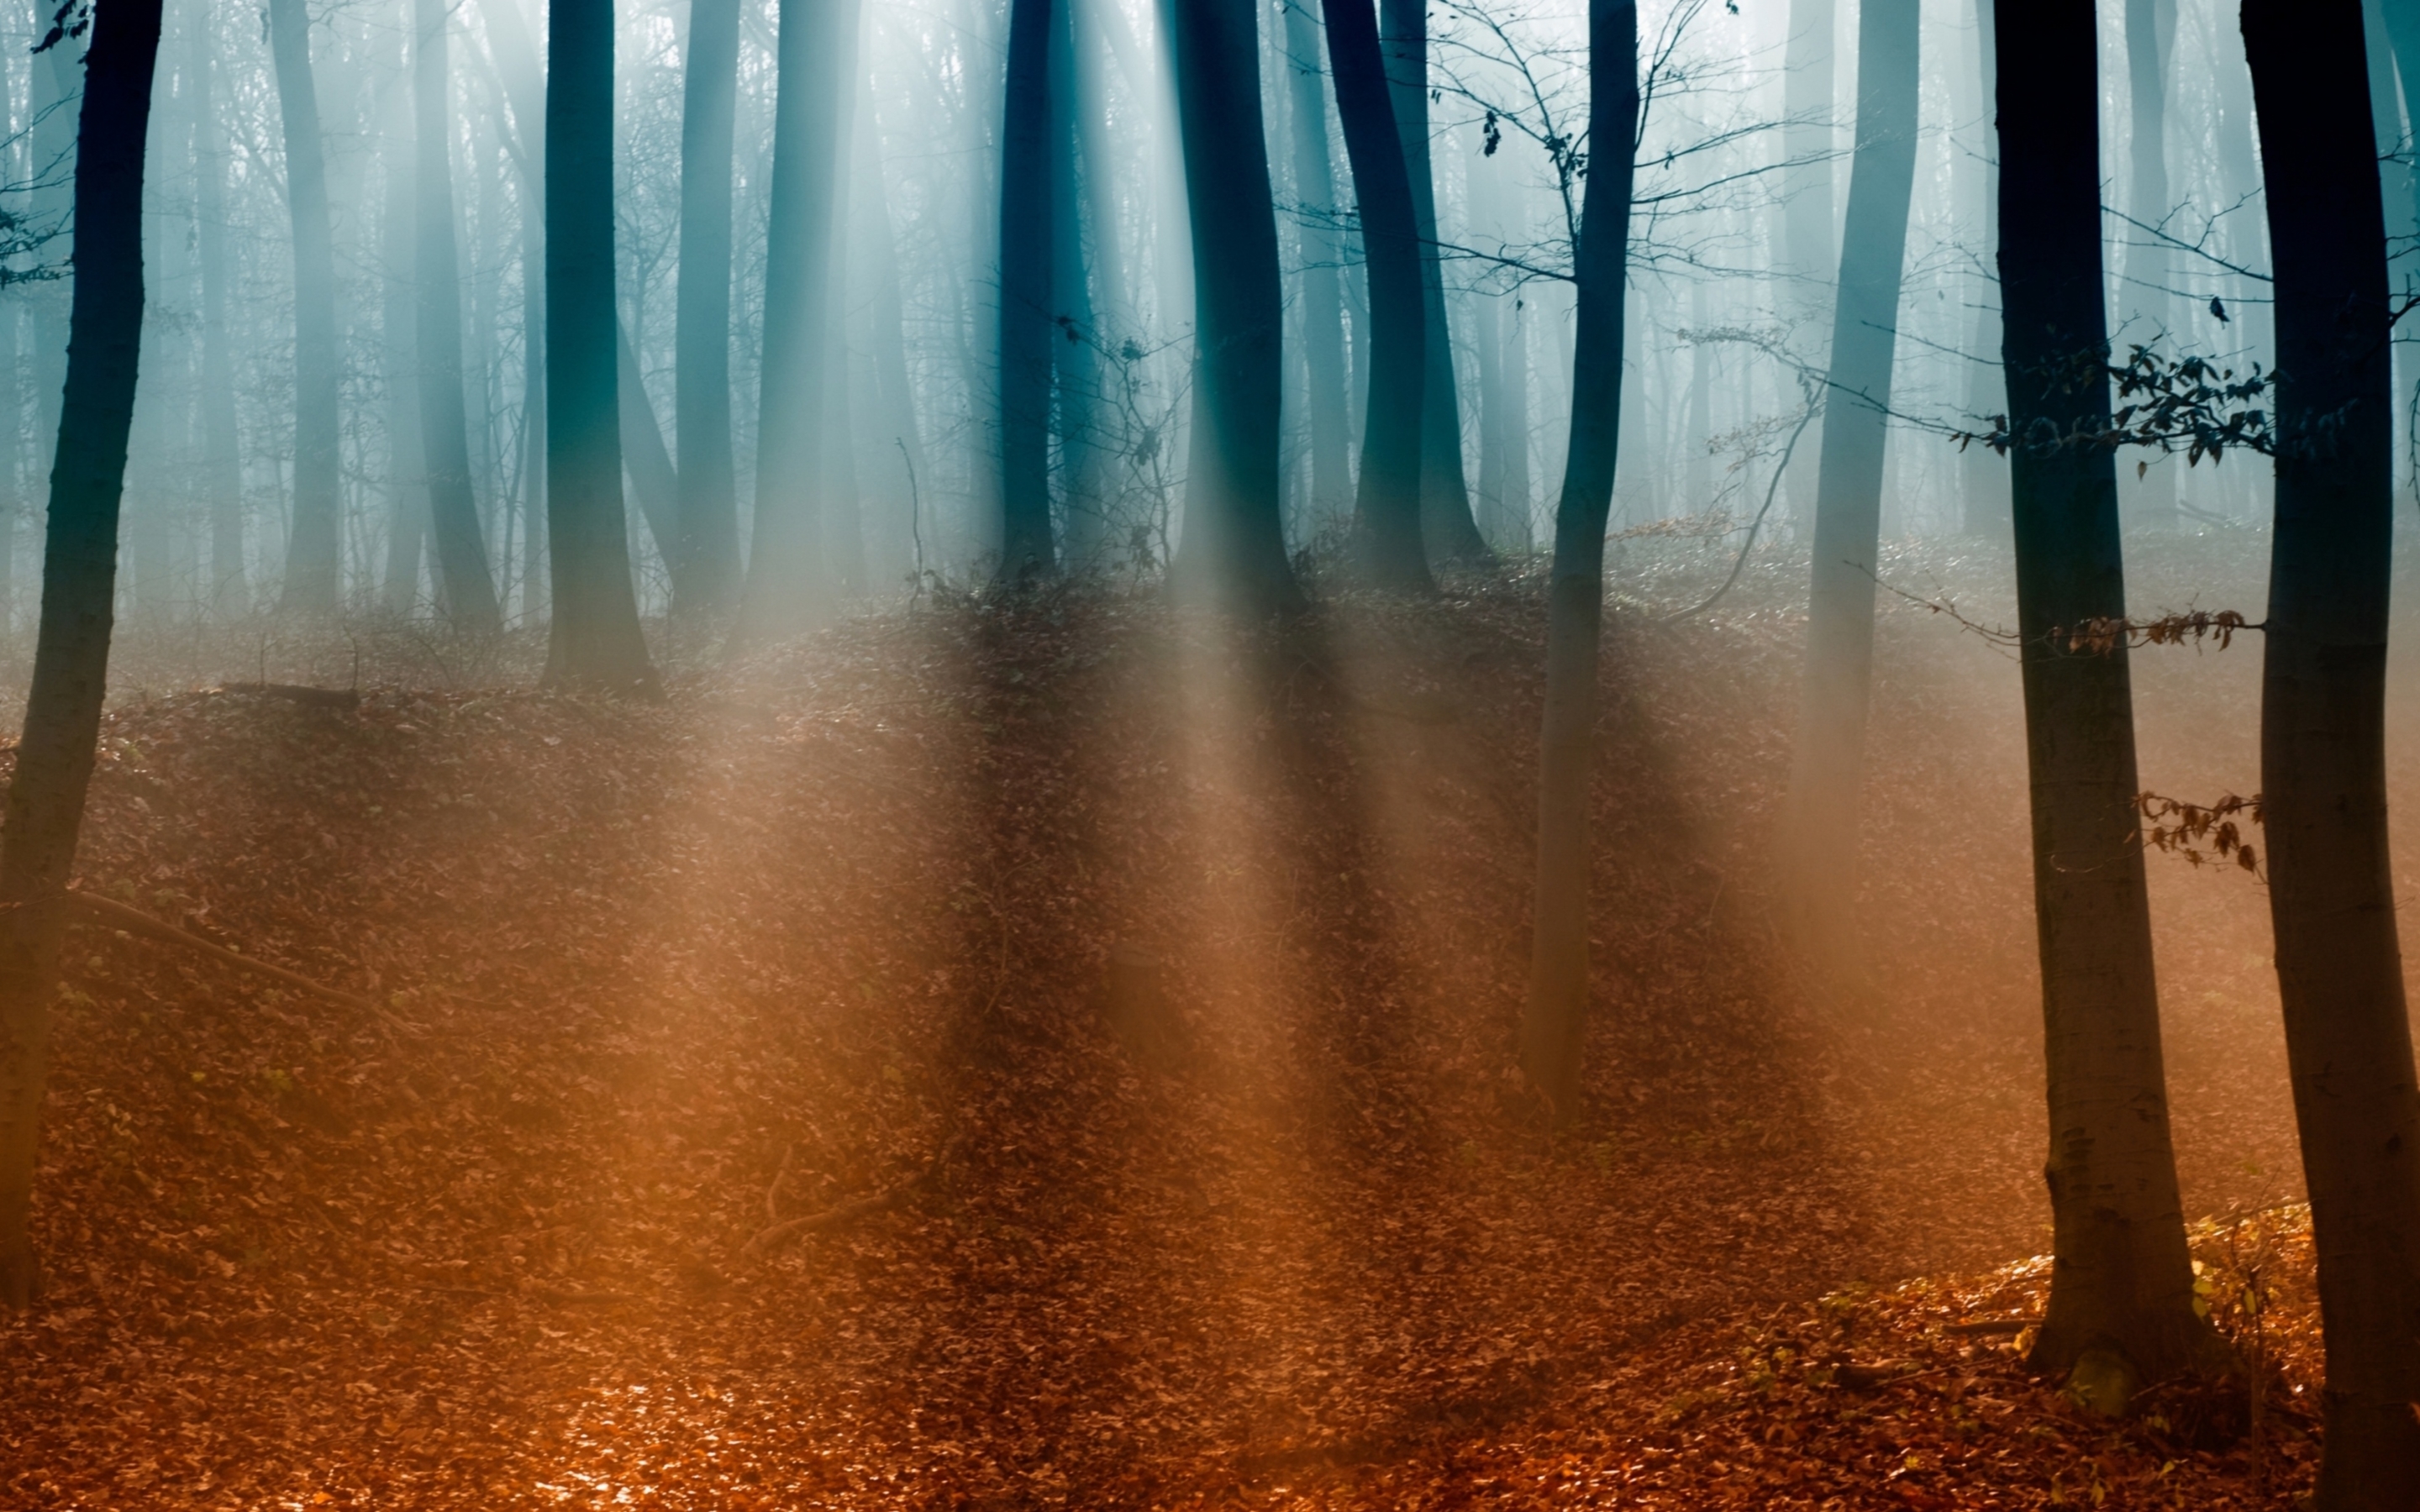 Retina Macbook Pro 15 Inch Wallpapers Autumn Forest - Hipster Fall Backgrounds - HD Wallpaper 